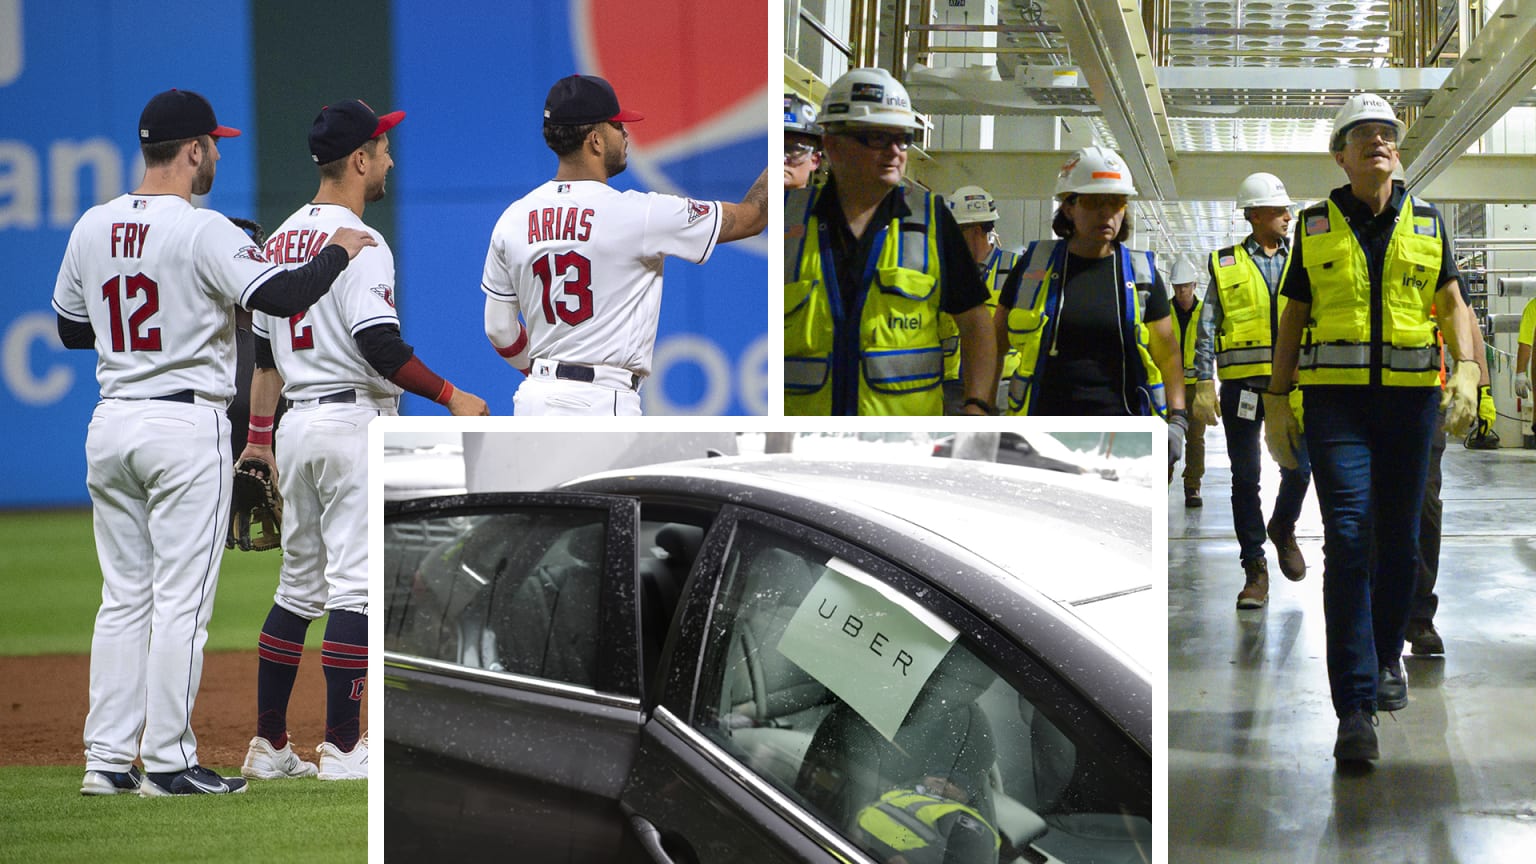 Ballplayers tend to deflect when asked by Uber drivers what they do for a living